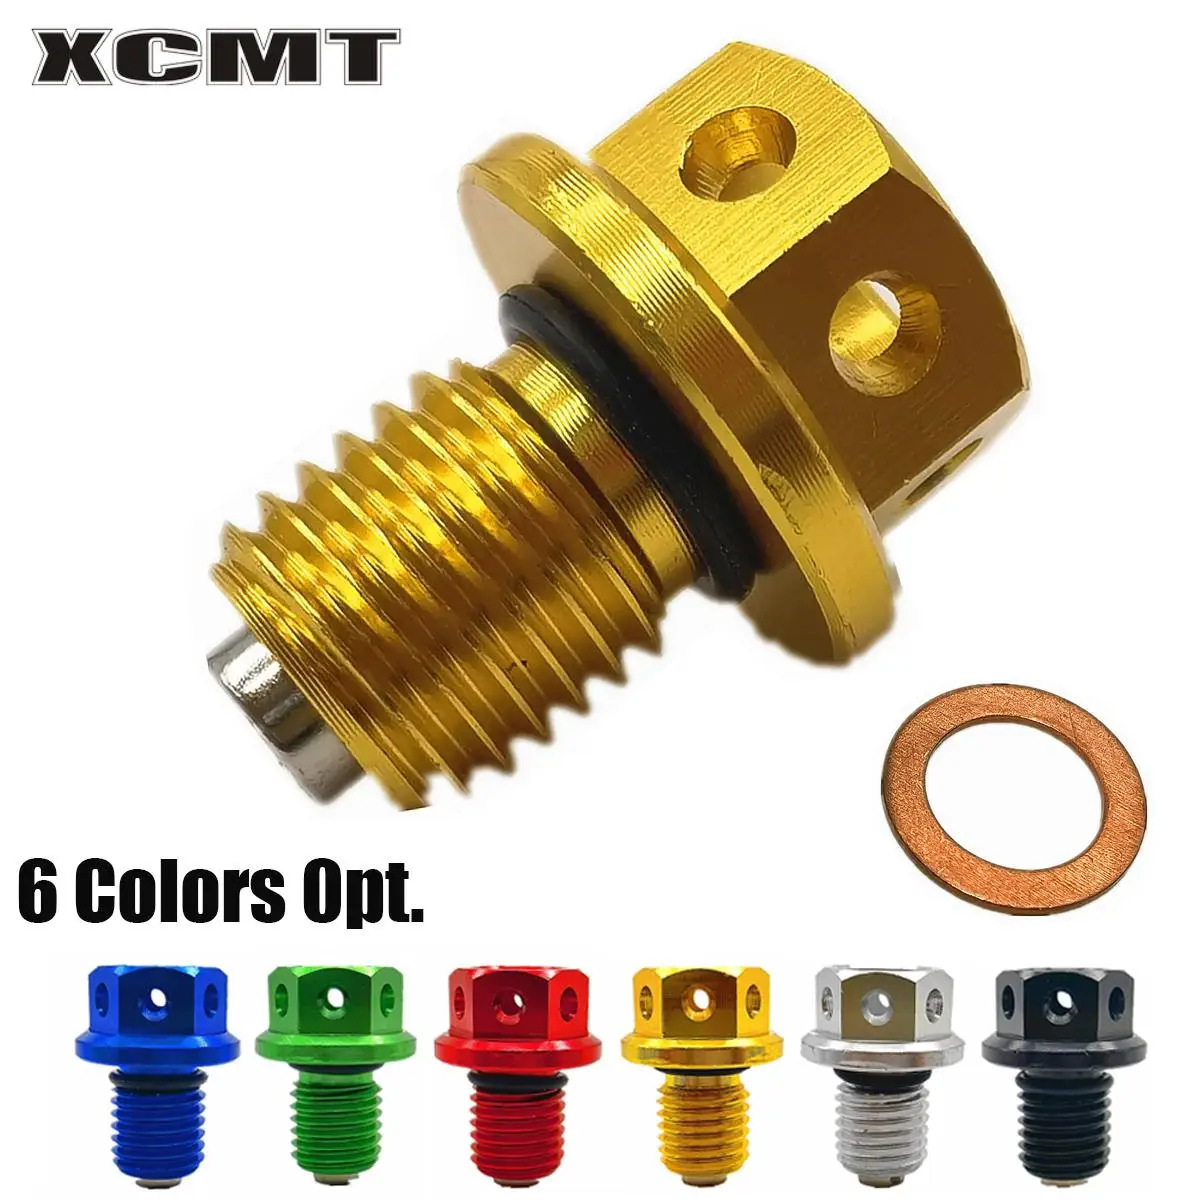 

CNC Magnetic Oil Drain Plug Bolt Fits For KTM SX SXF EXC XC XCW XCF EXCF FREERIDE 50 65 125 200 250 300 350 450 530 2000-2020